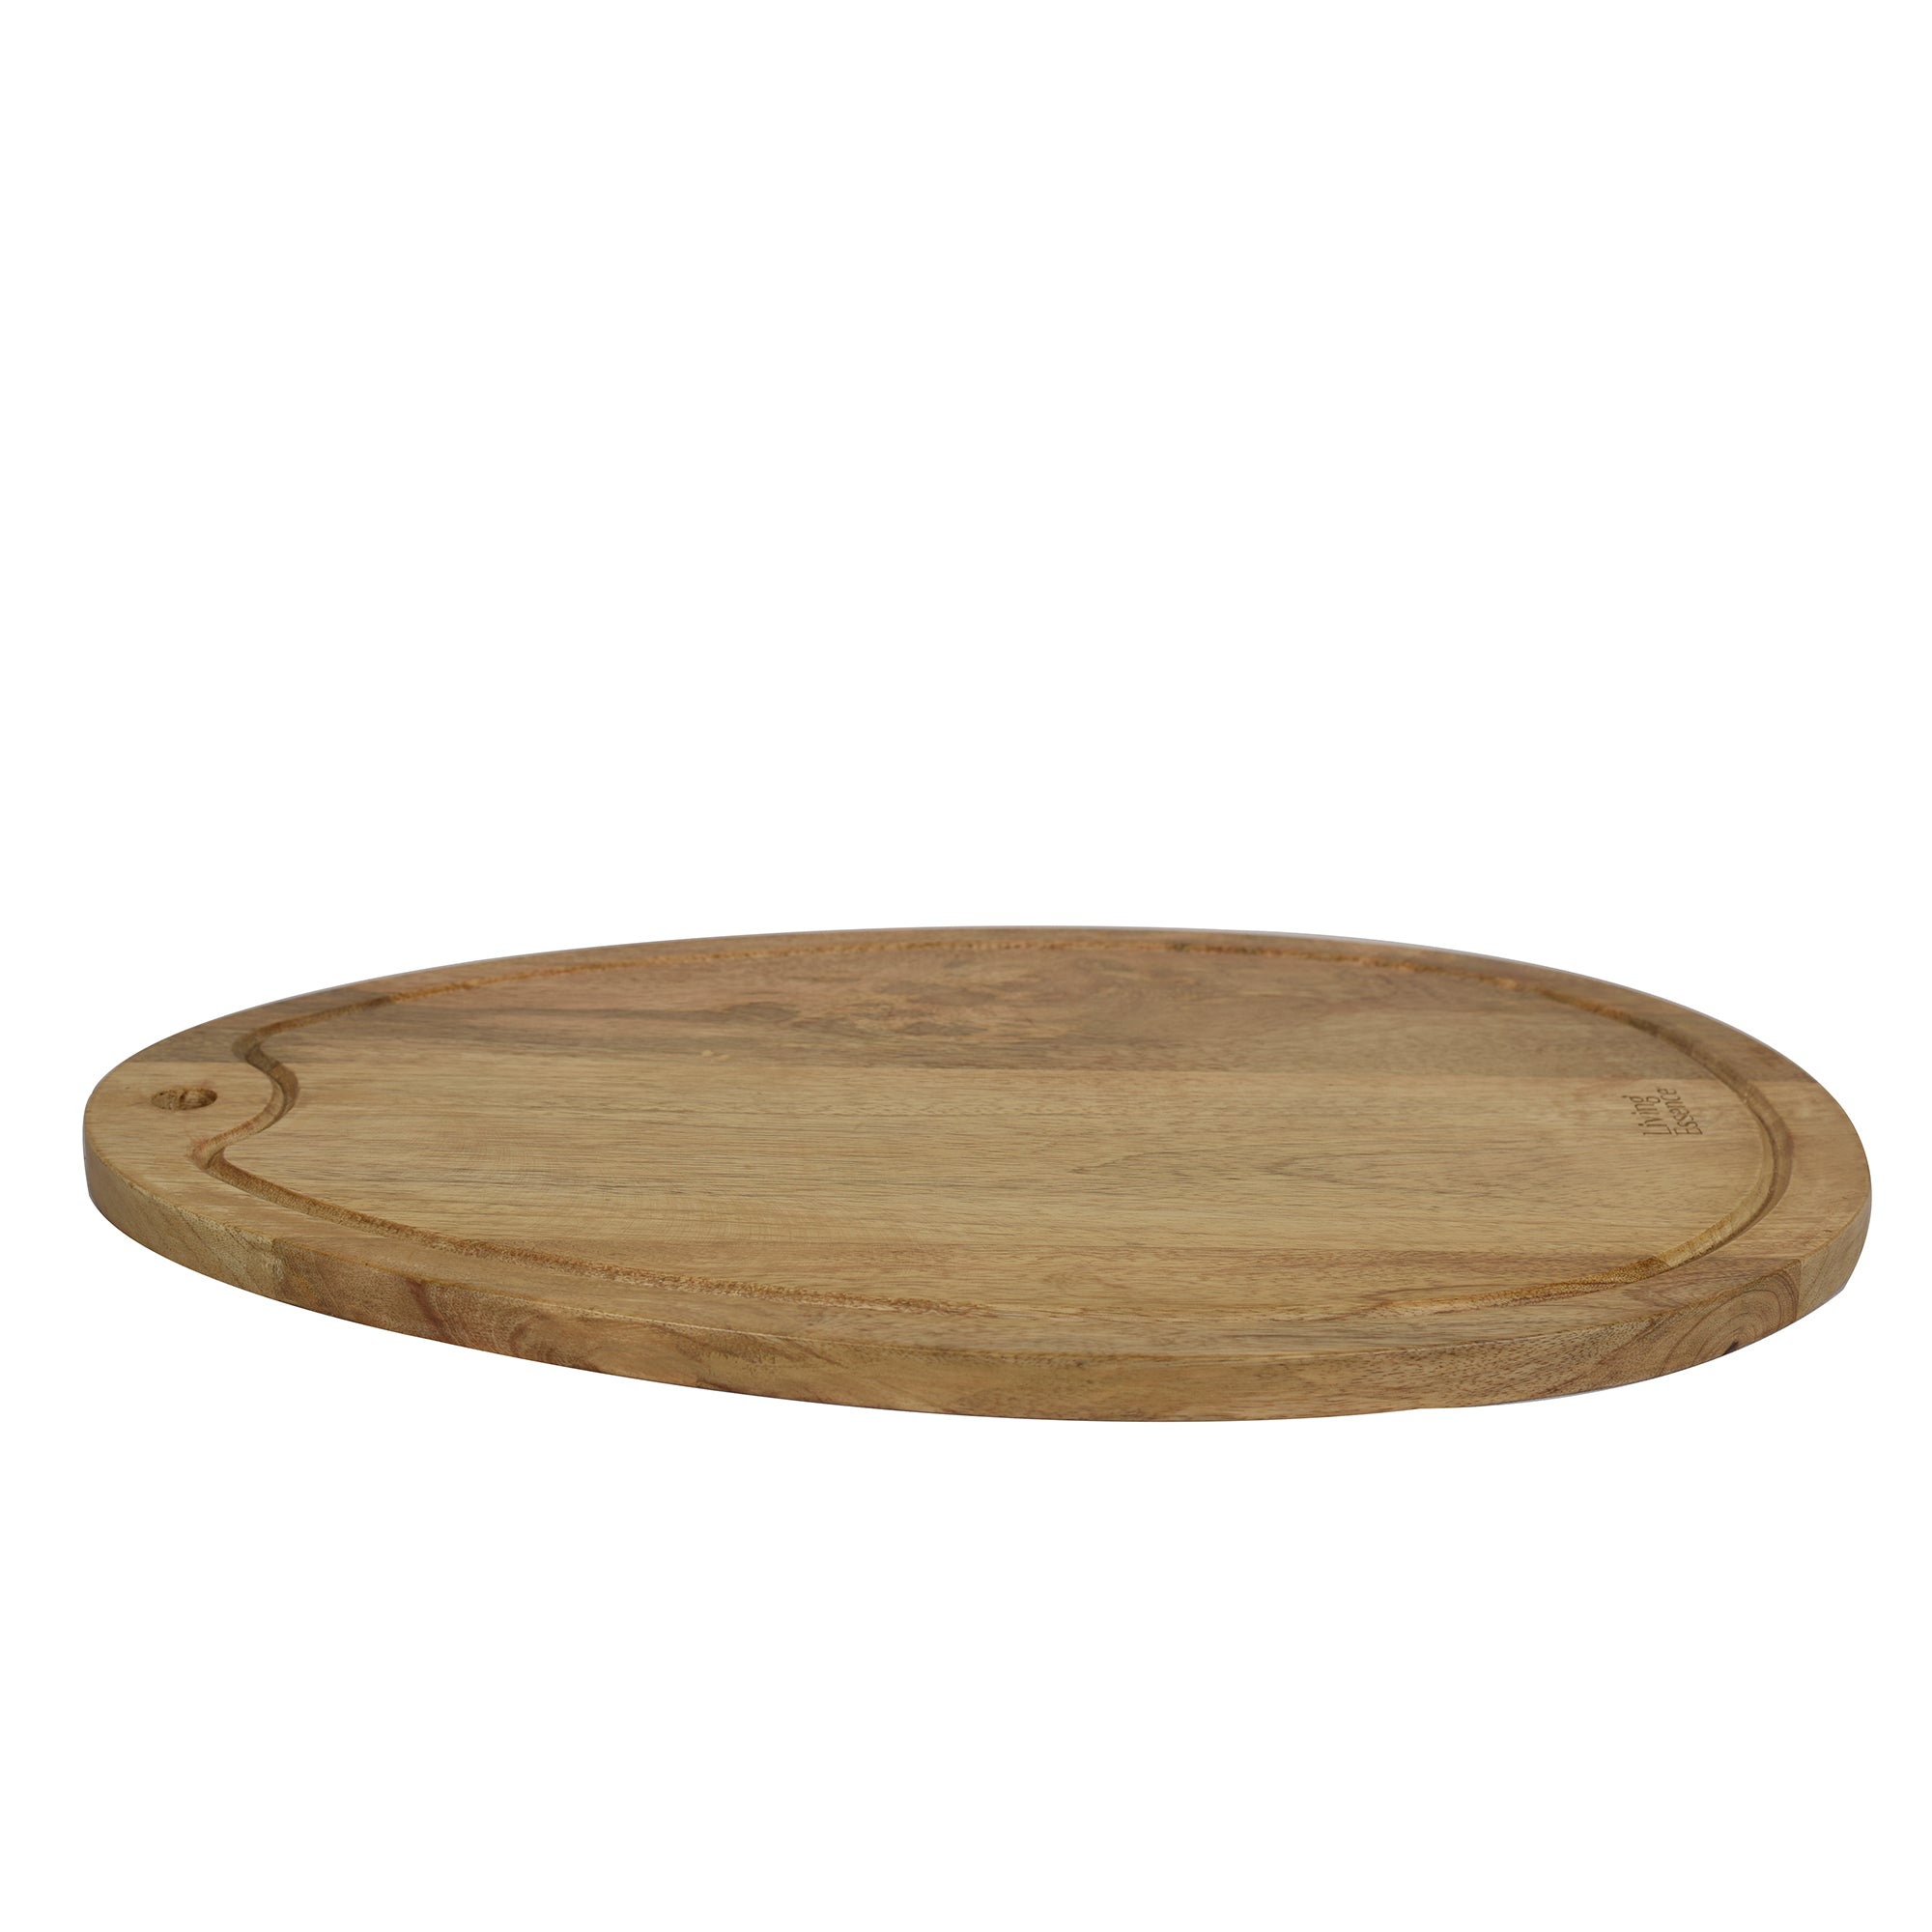 Aachman Wooden Oval Grooved Platter Cheese Board 17.5 inches